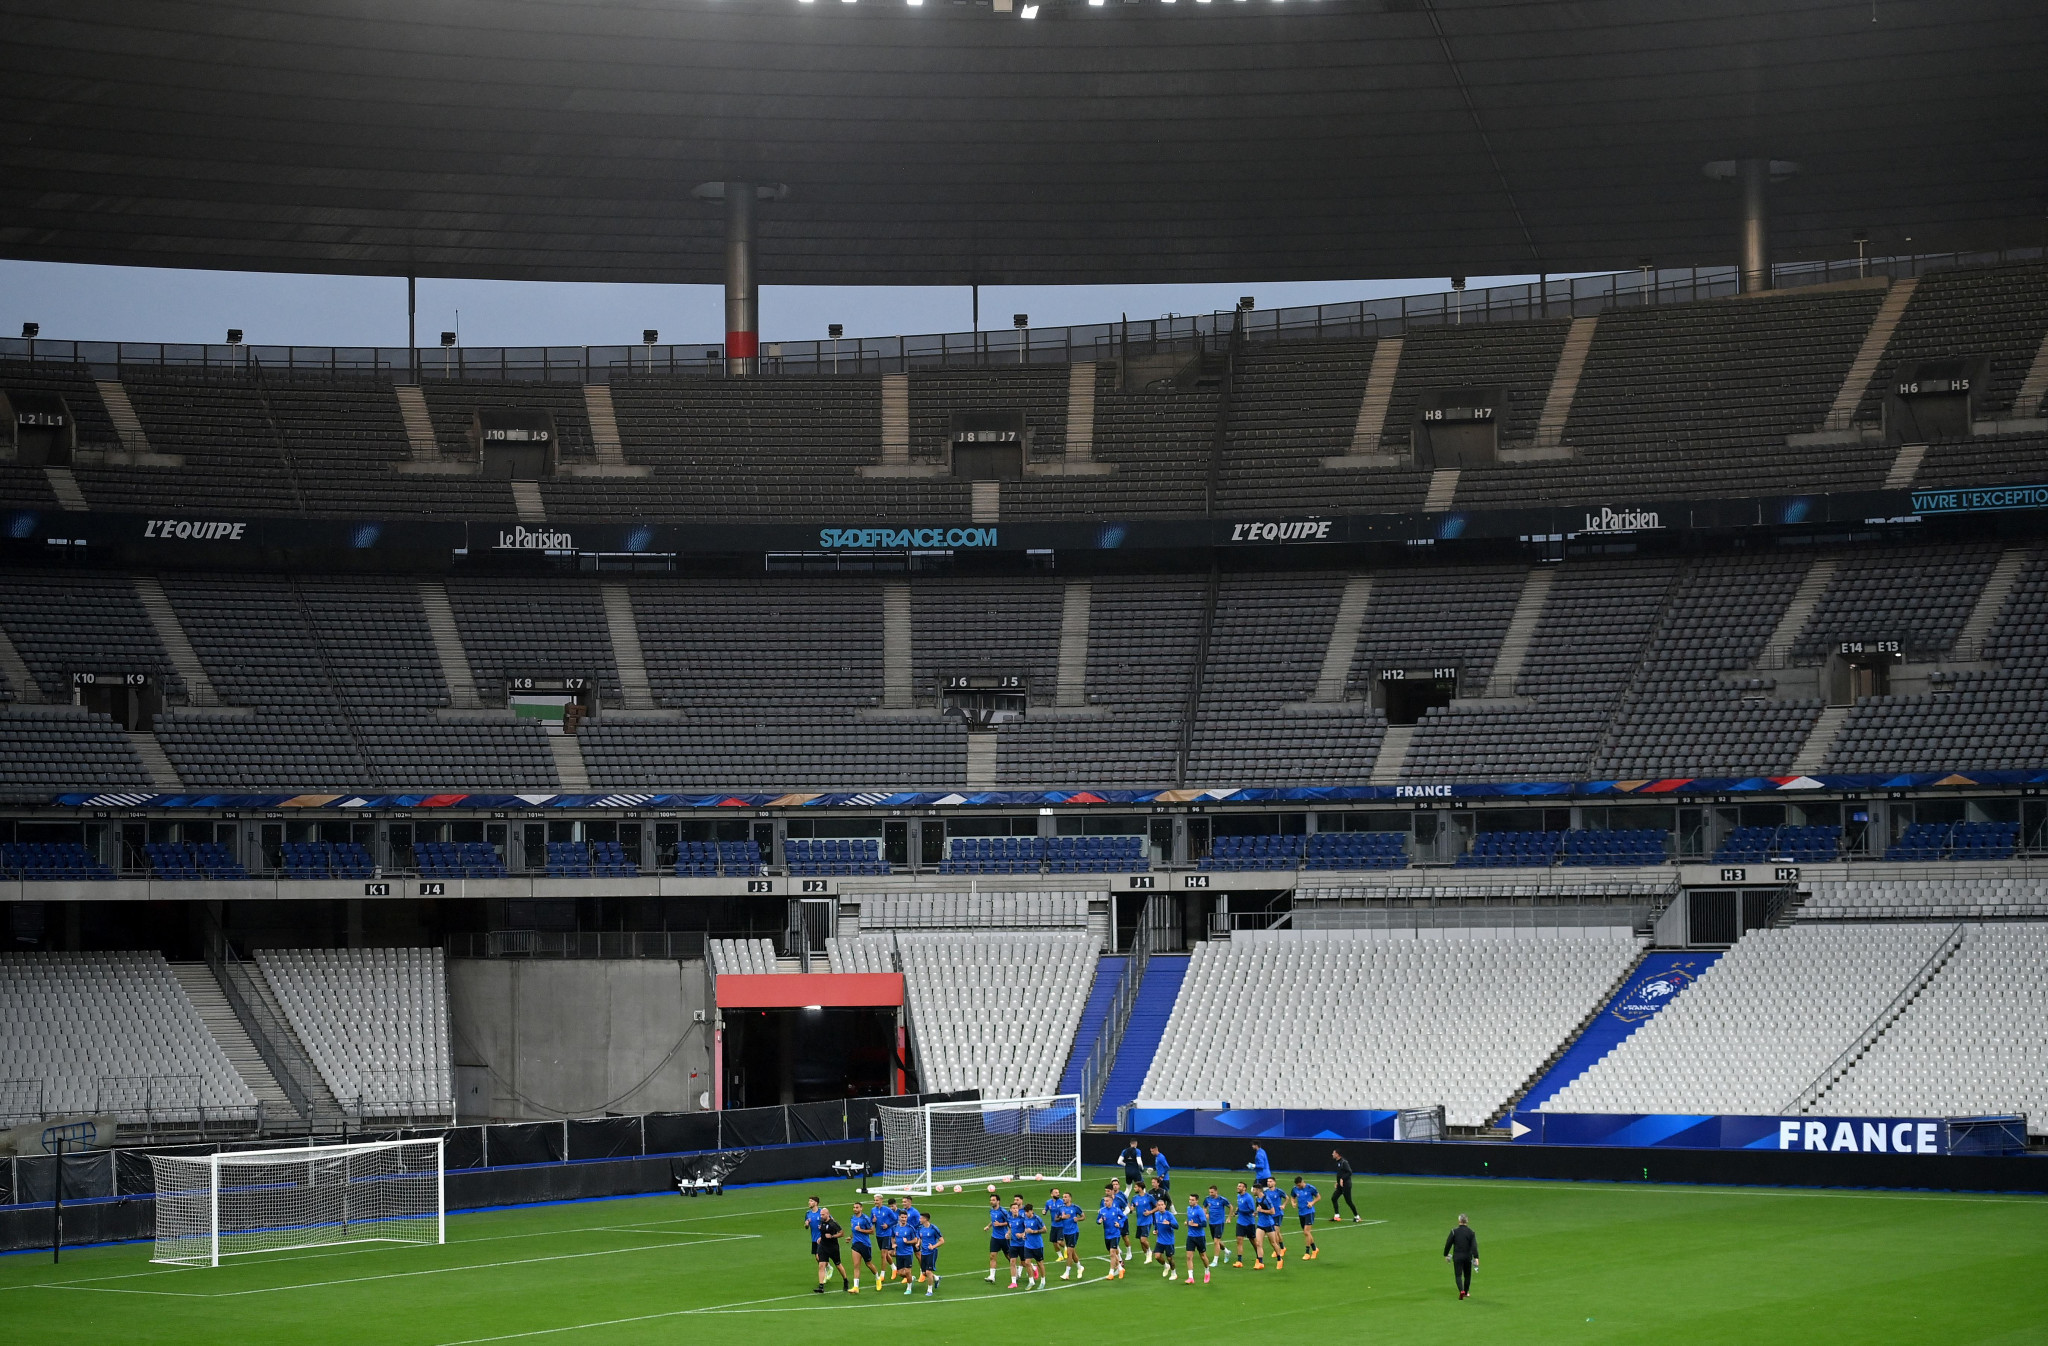 The Stade de France is owned by the French state, and the current consortium's management contract is set to expire in 2025 ©Getty Images